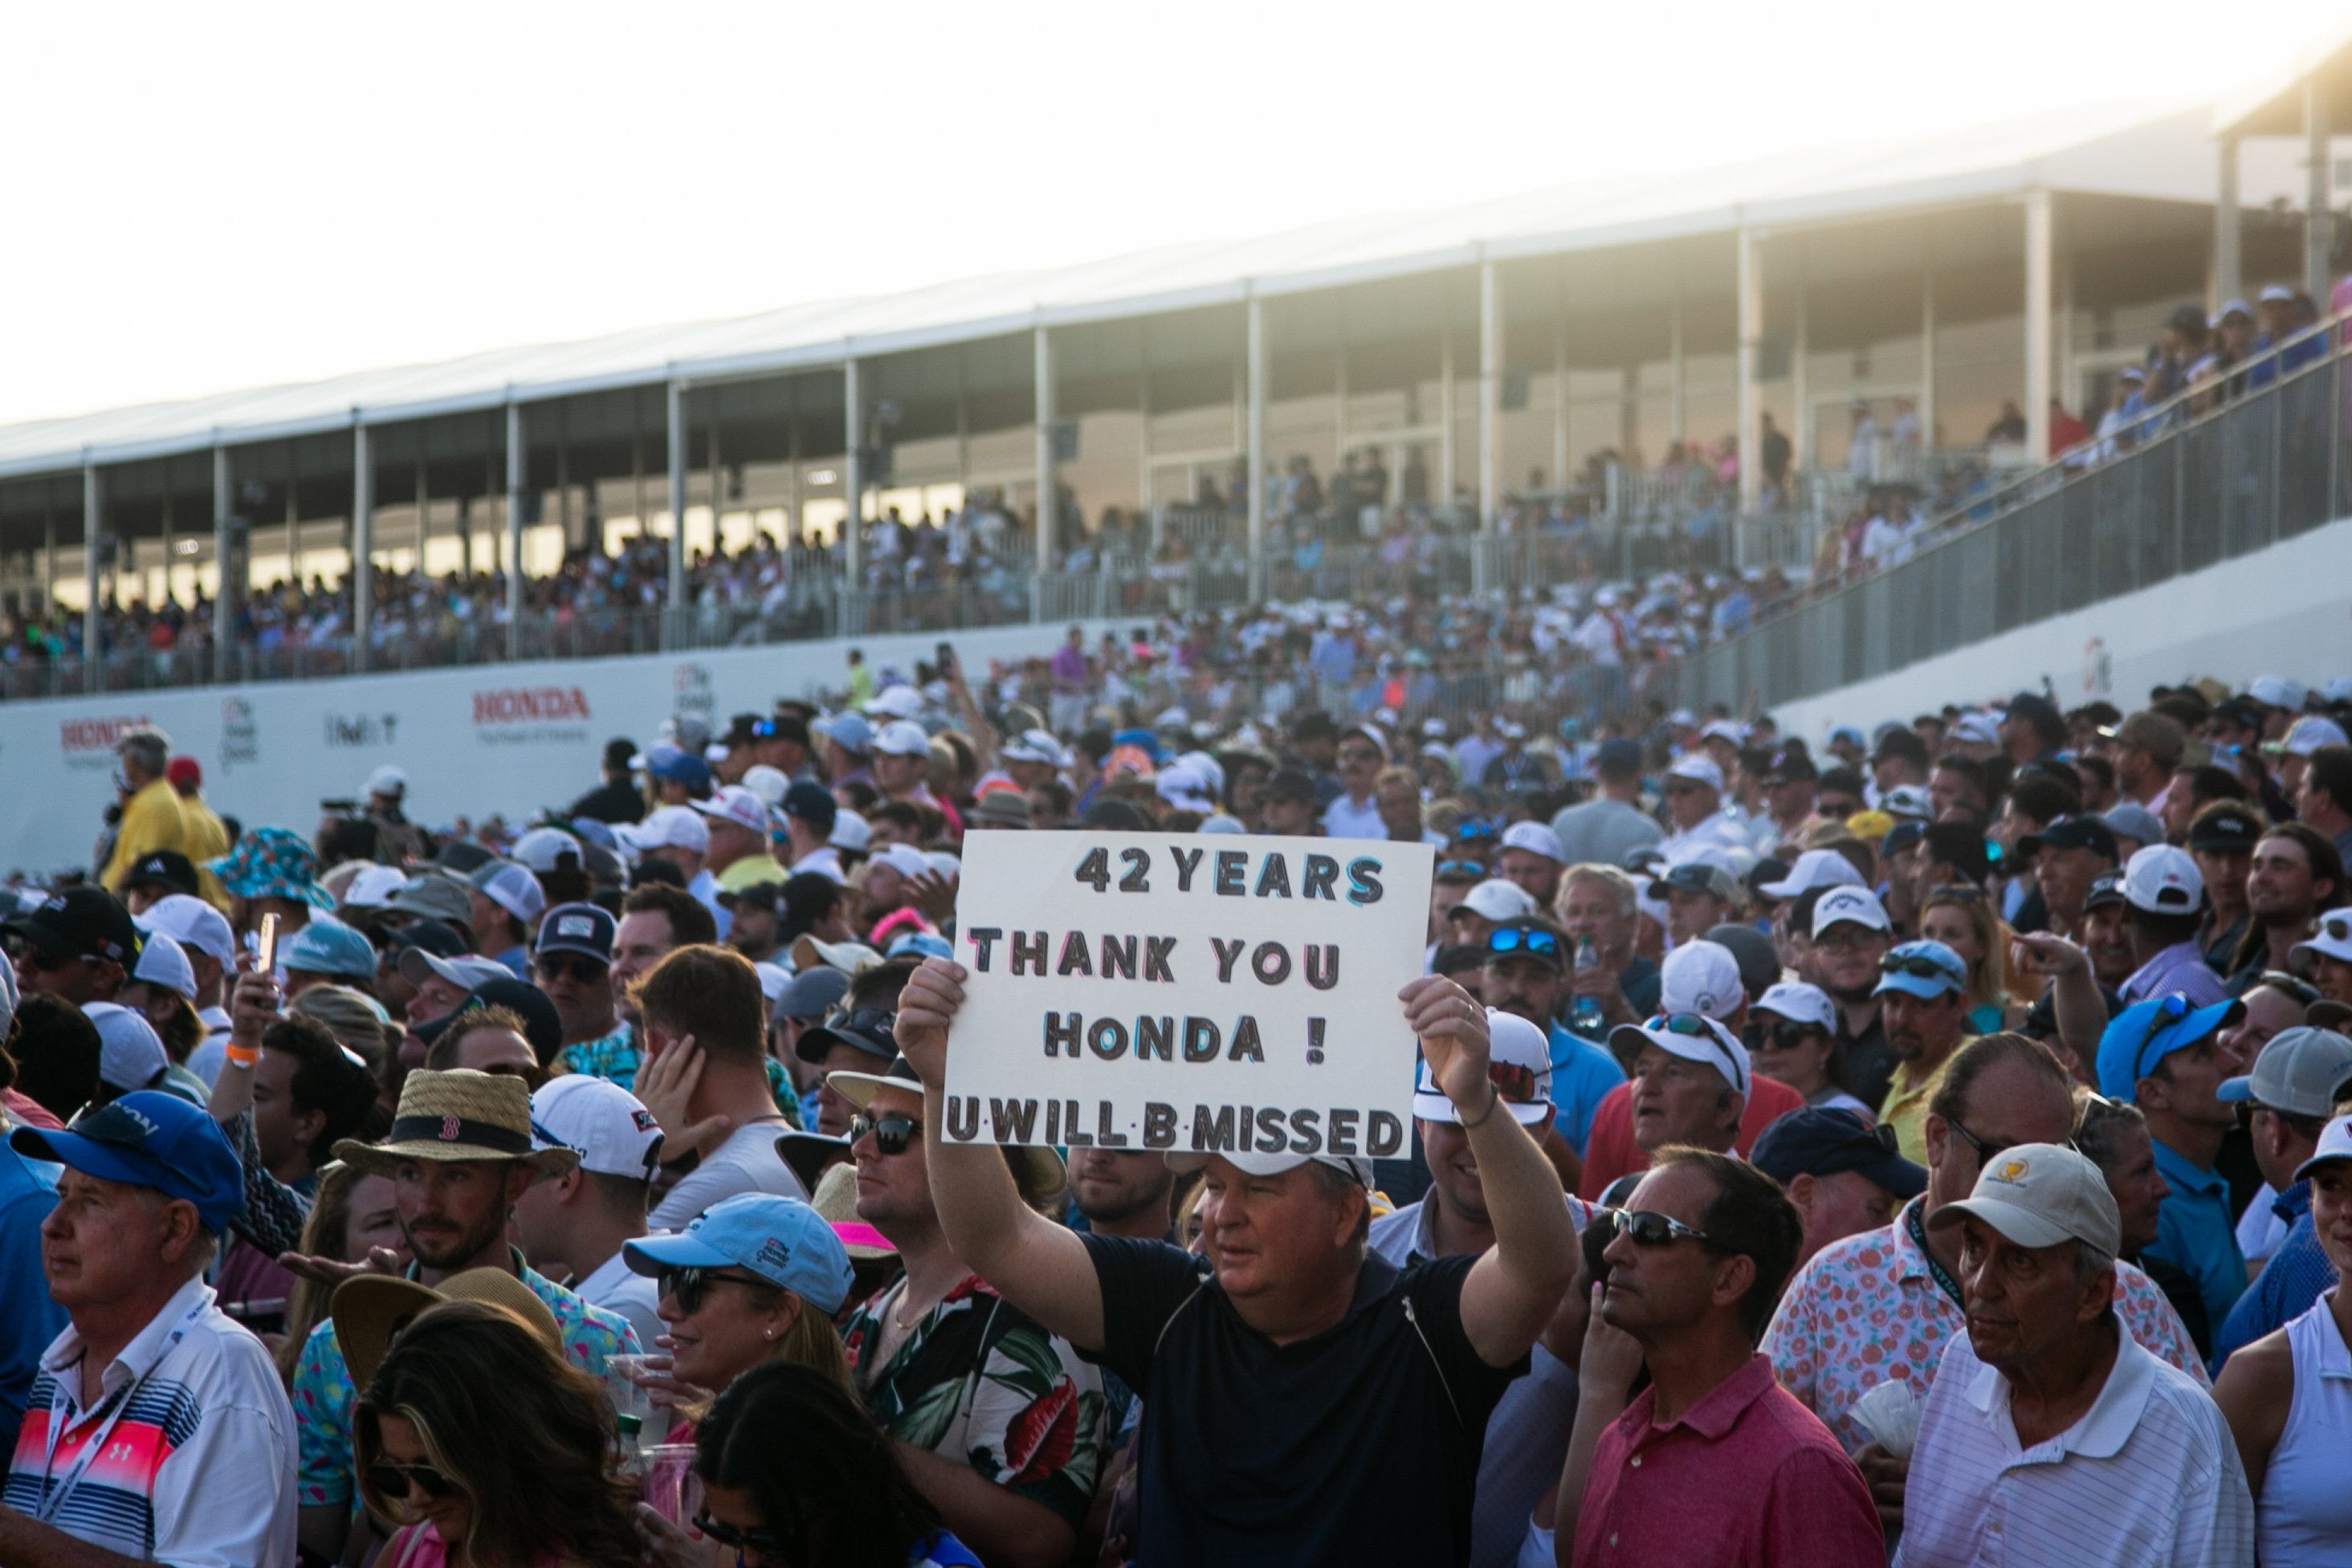 John Keiley, a part-time Jupiter resident, lifts a sign expressing gratitude for 42 years of the Honda Classic, seen during the final round of the event at PGA National on Feb. 26 in Palm Beach Gardens.